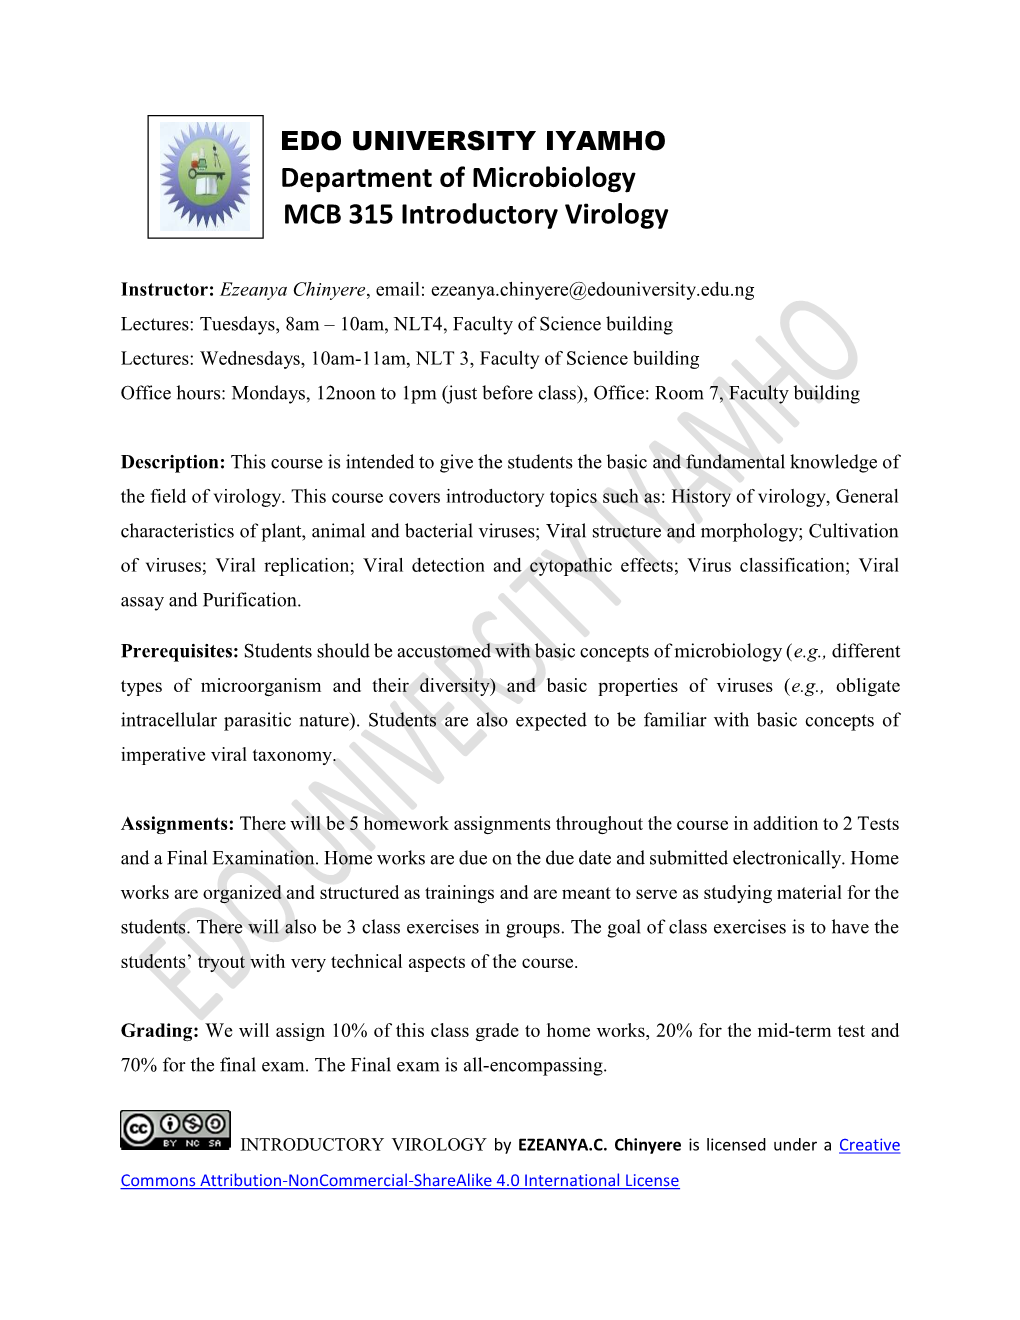 Department of Microbiology MCB 315 Introductory Virology